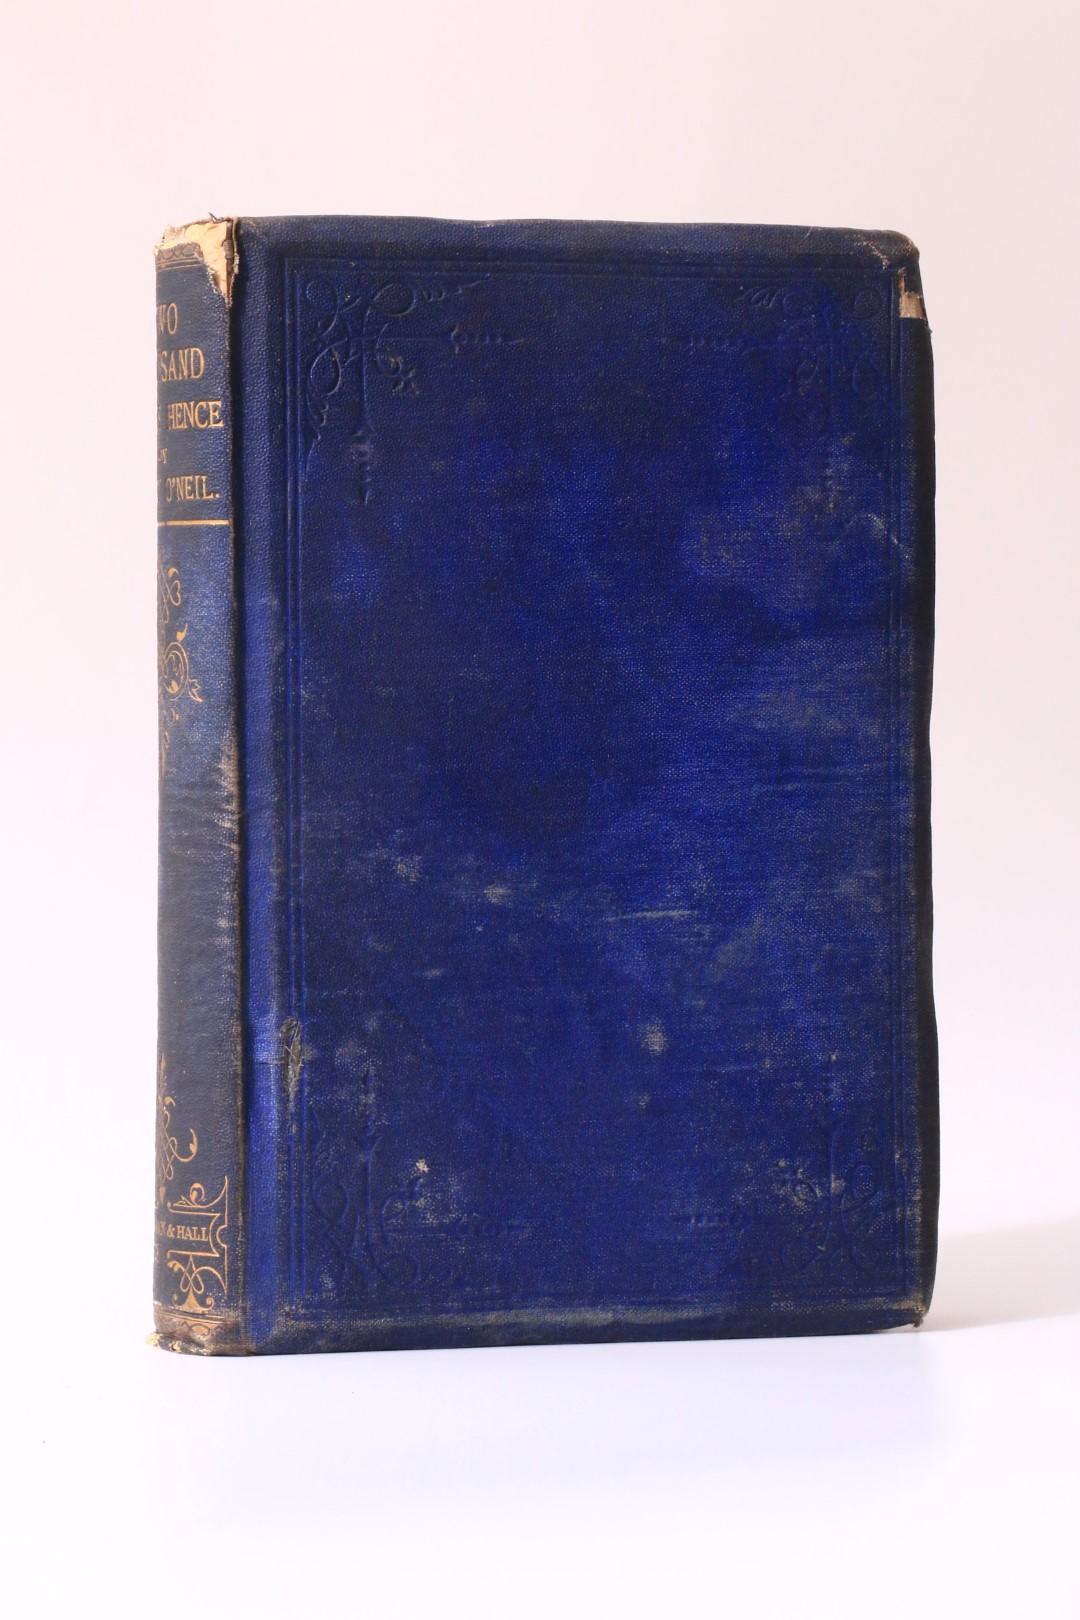 Henry O'Neil - Two Thousand Years Hence - Chapman & Hall, n.d. [1867], First Edition.